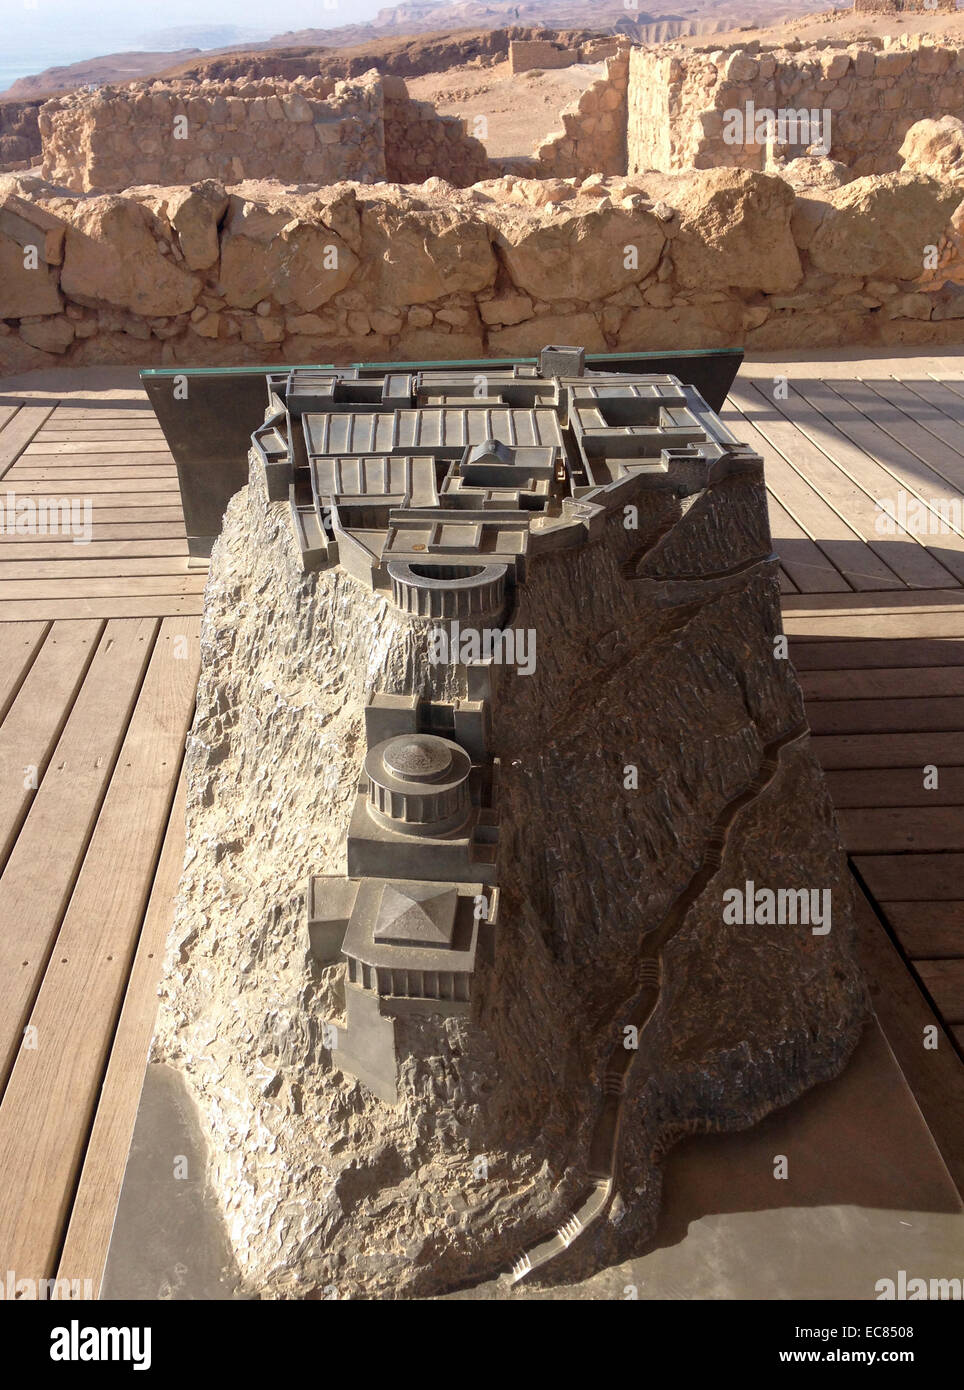 View of a model of Masada. Masada is an ancient fortification in the Southern District of Israel situated on top of an isolated rock plateau on the edge of the Judean Desert; overlooking the Dead Sea. Herod had built Palaces for himself on the mountain and fortified Masada between 37 and 31 BCE. Stock Photo